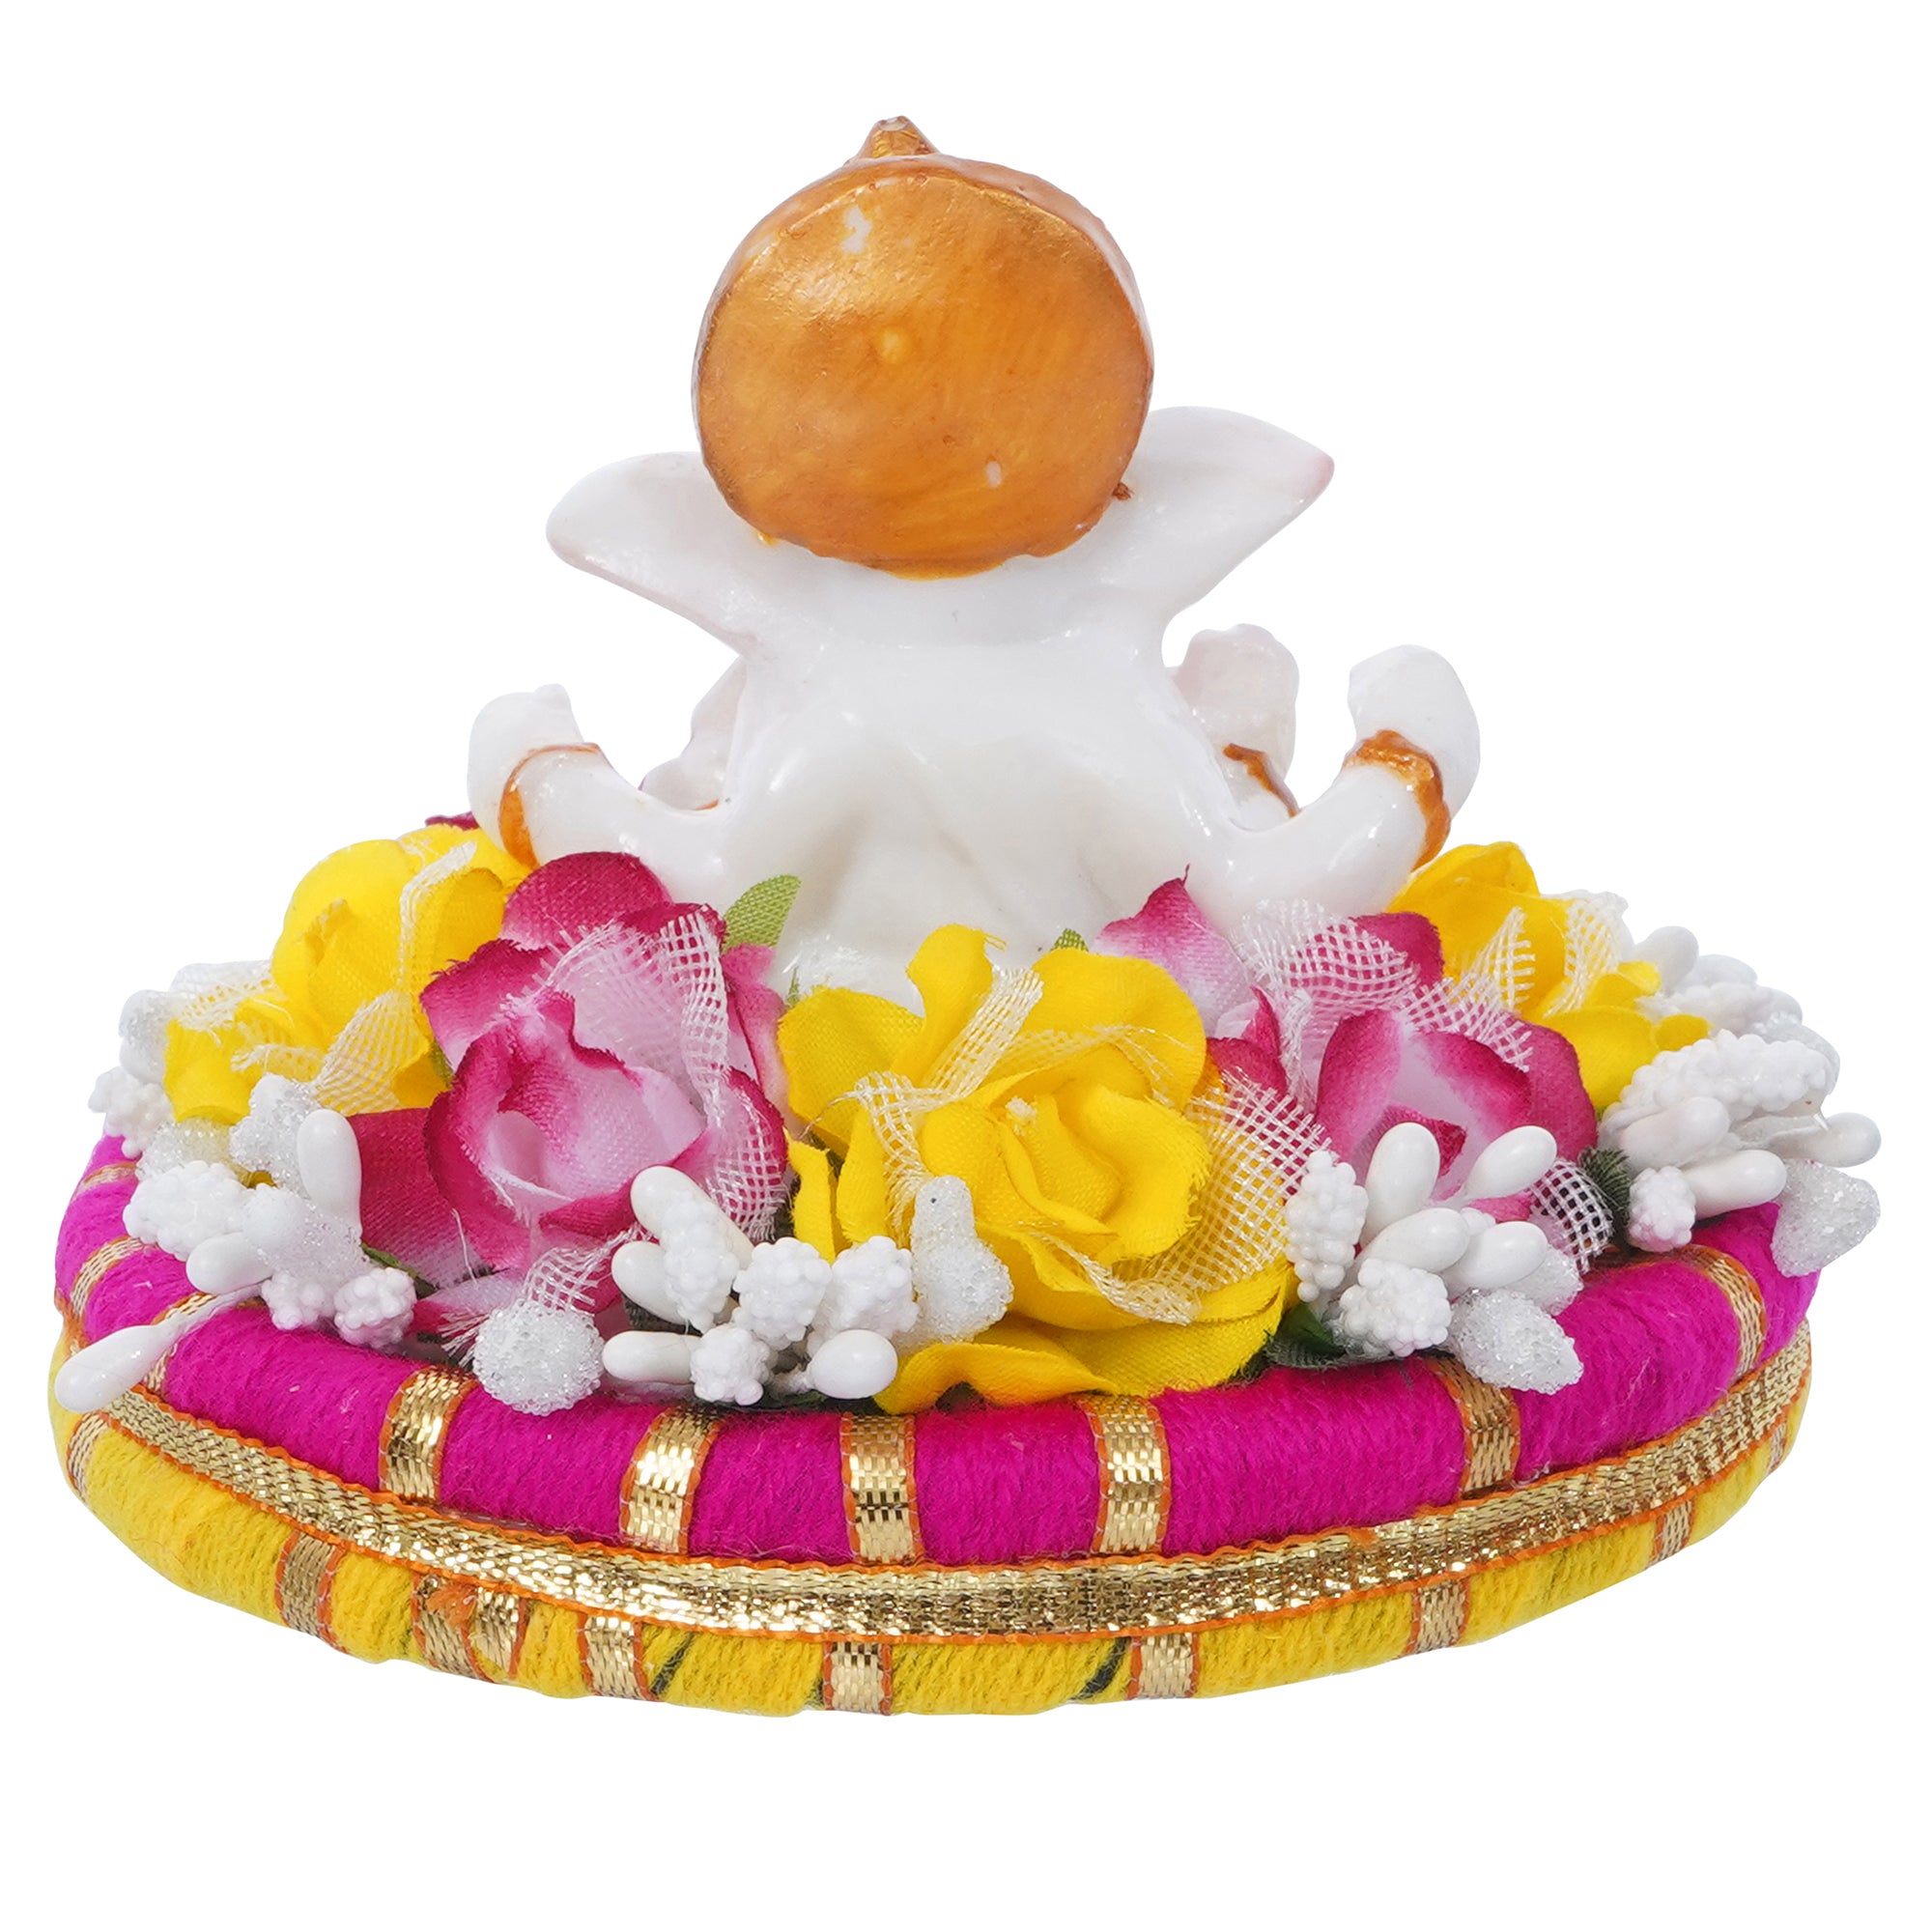 Lord Ganesha Idol On Decorative Handcrafted Colorful Flowers Plate 7